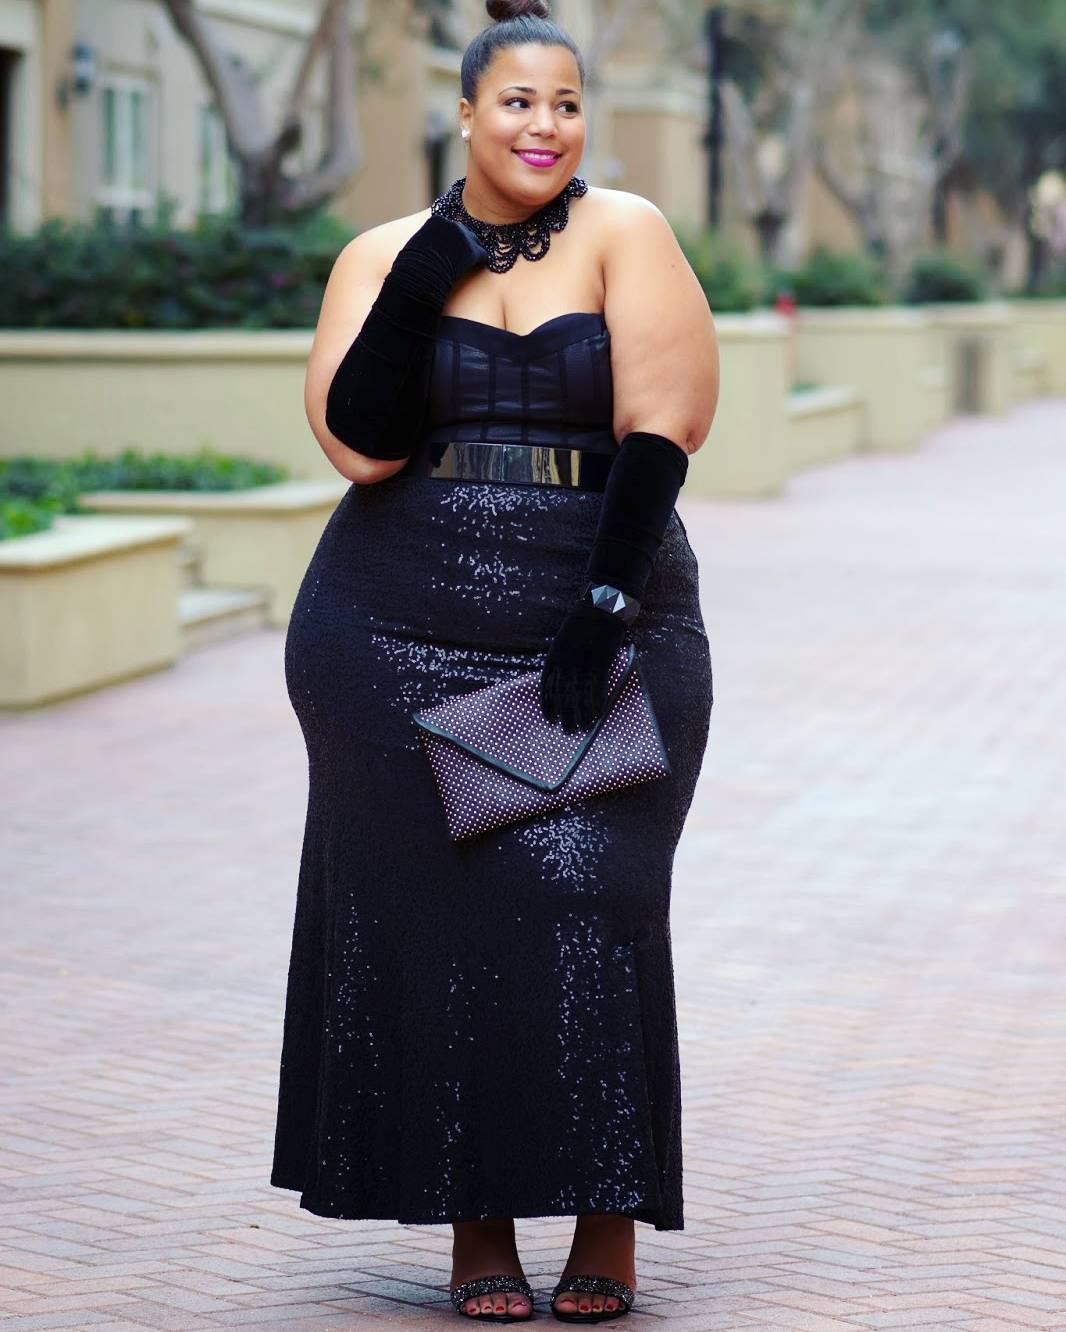 Sequin pencil skirt, Plus-size clothing, Plus-size model on Stylevore